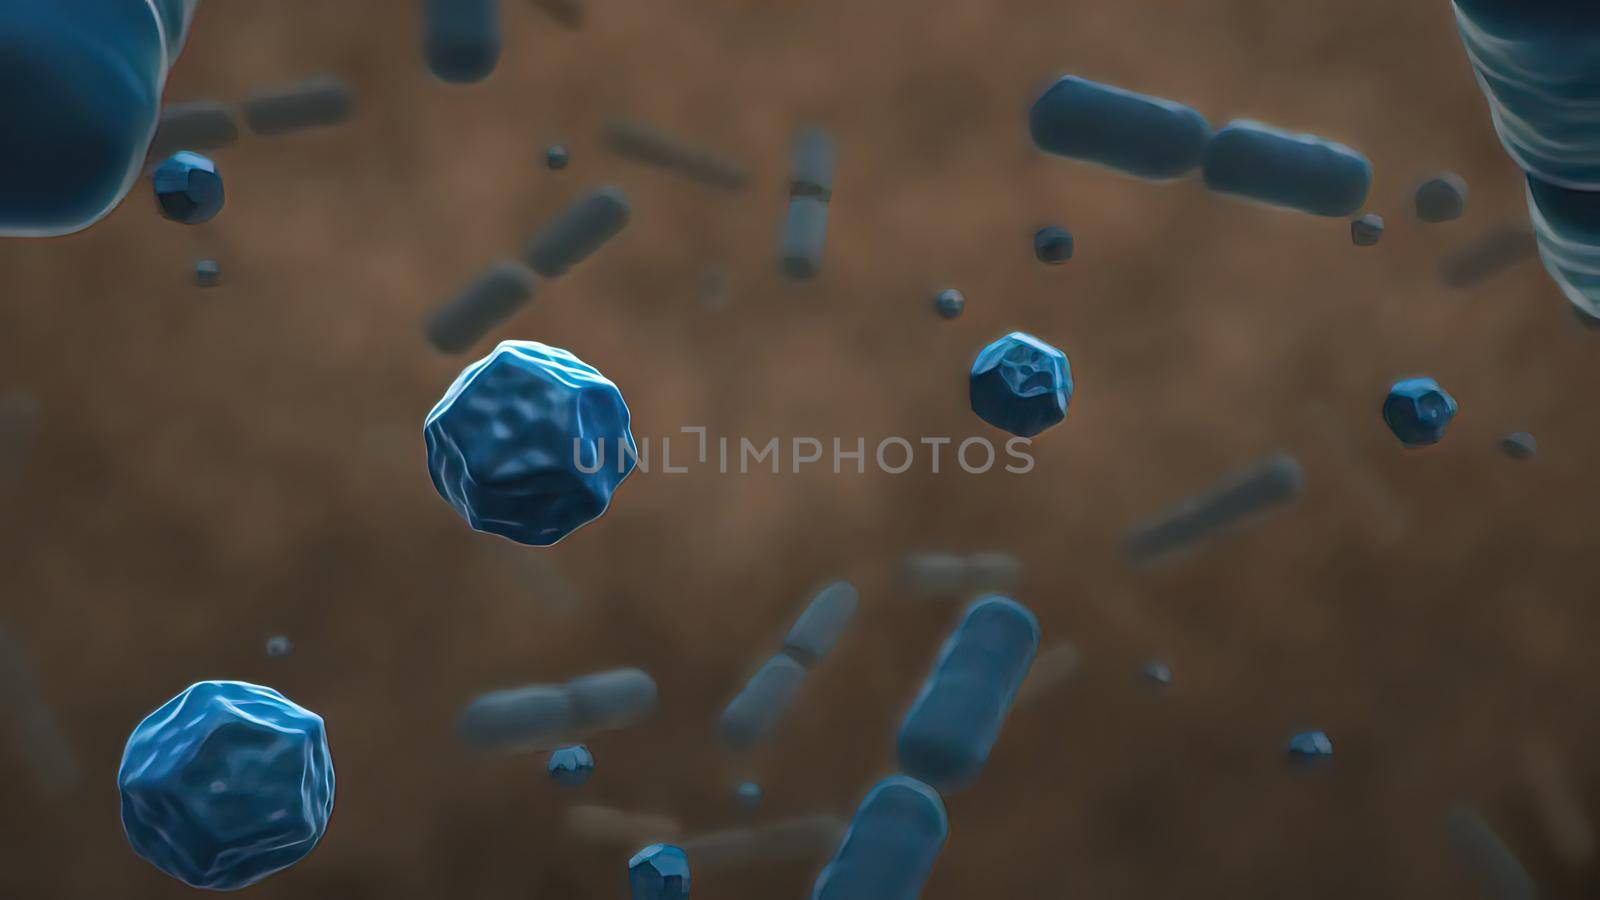 Normal flora of small intestine, lactic acid bacteria. Probiotic bacterium by creativepic